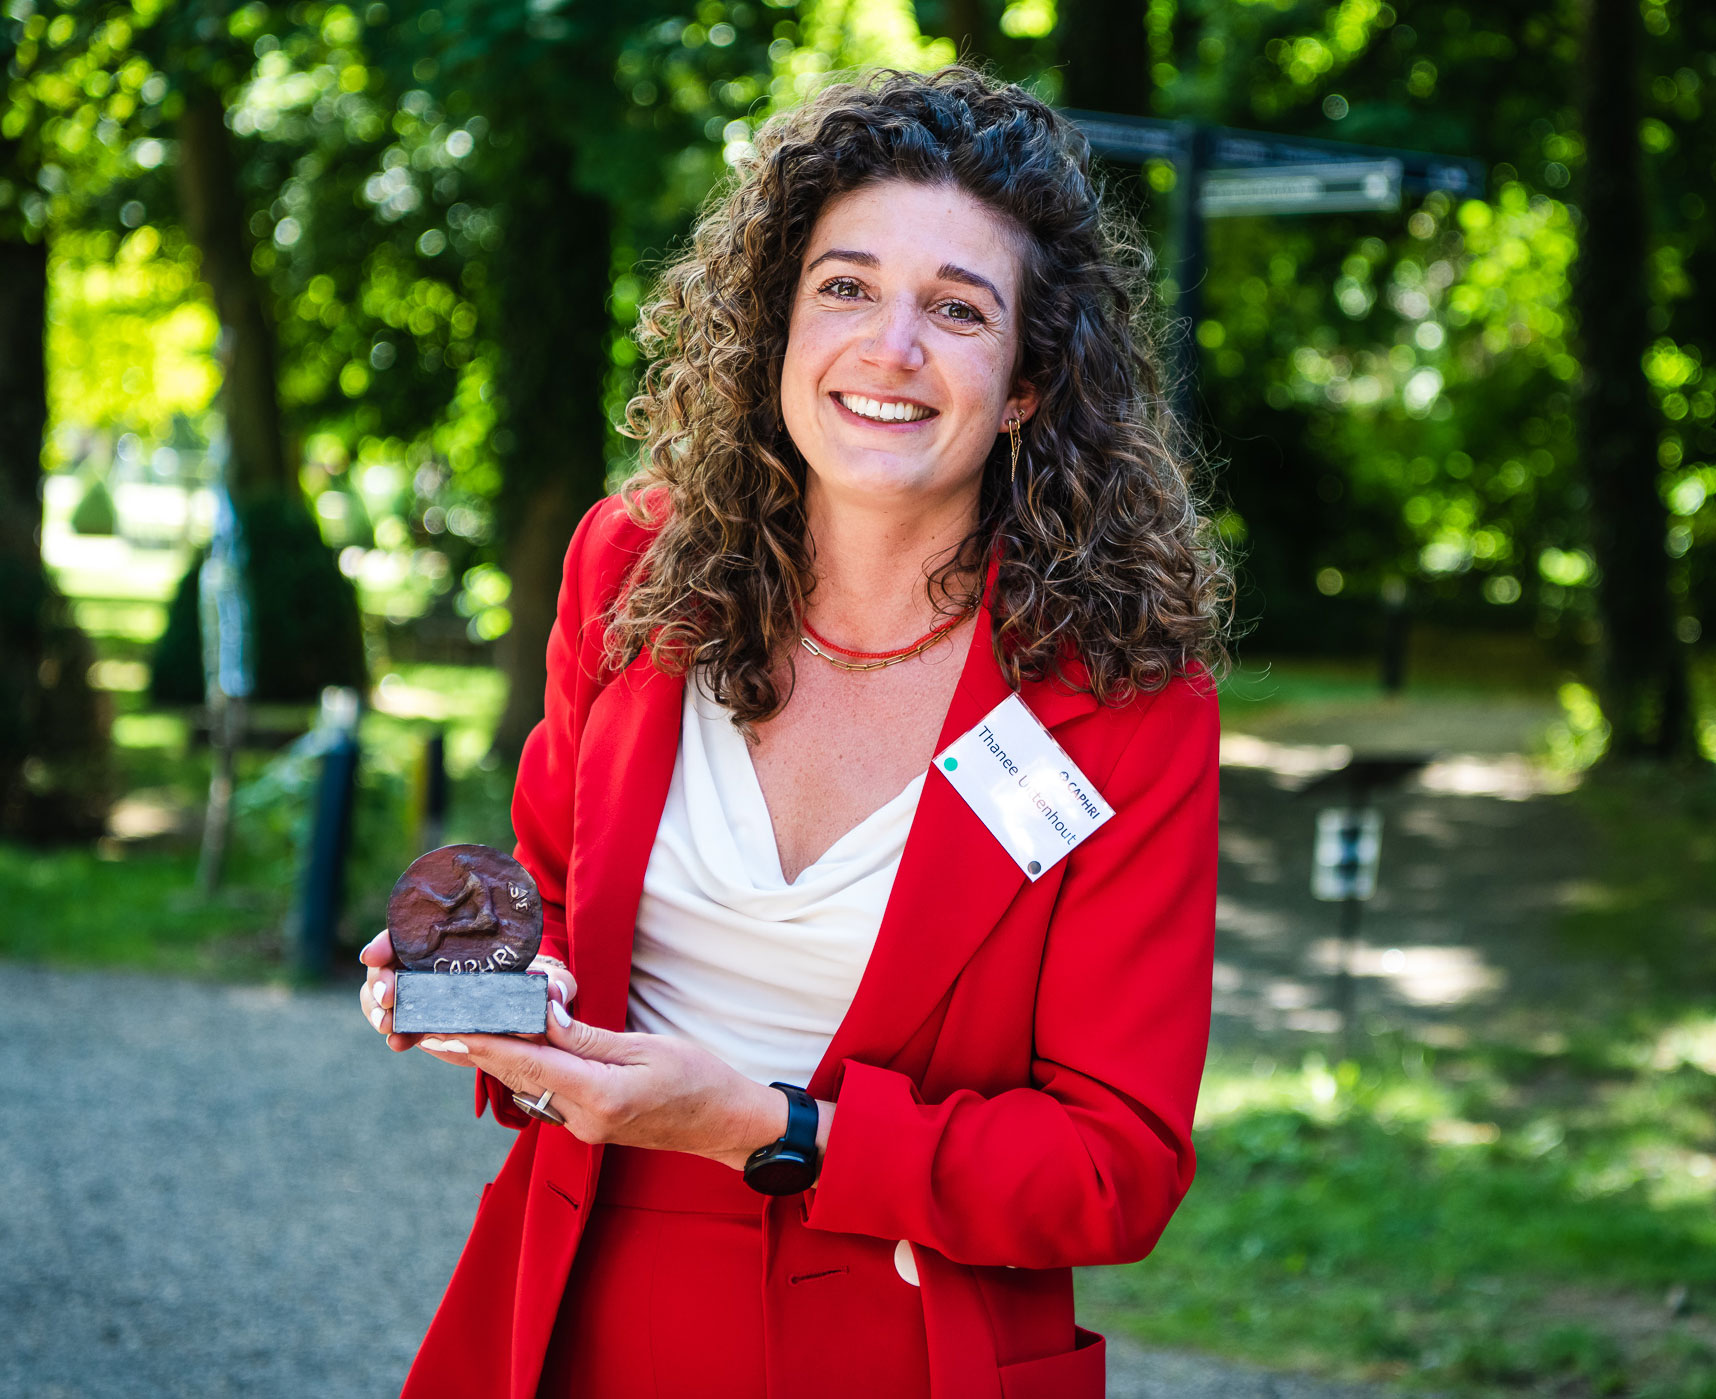 PhD Video Award for Thanee Uittenhout